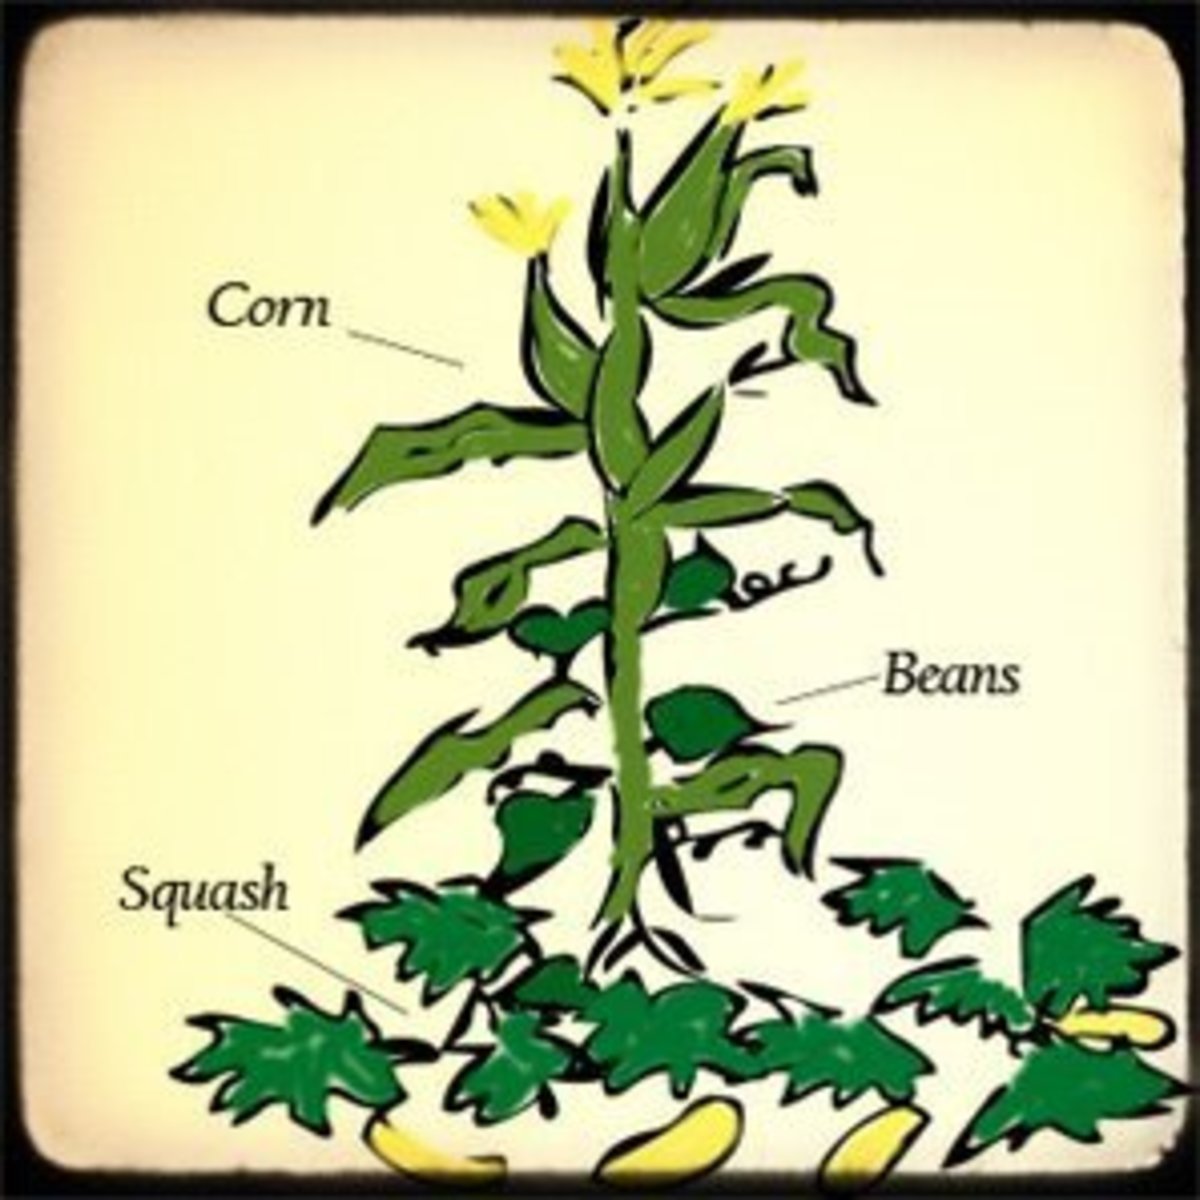 Corn, Beans, and Squash: The Three Sisters